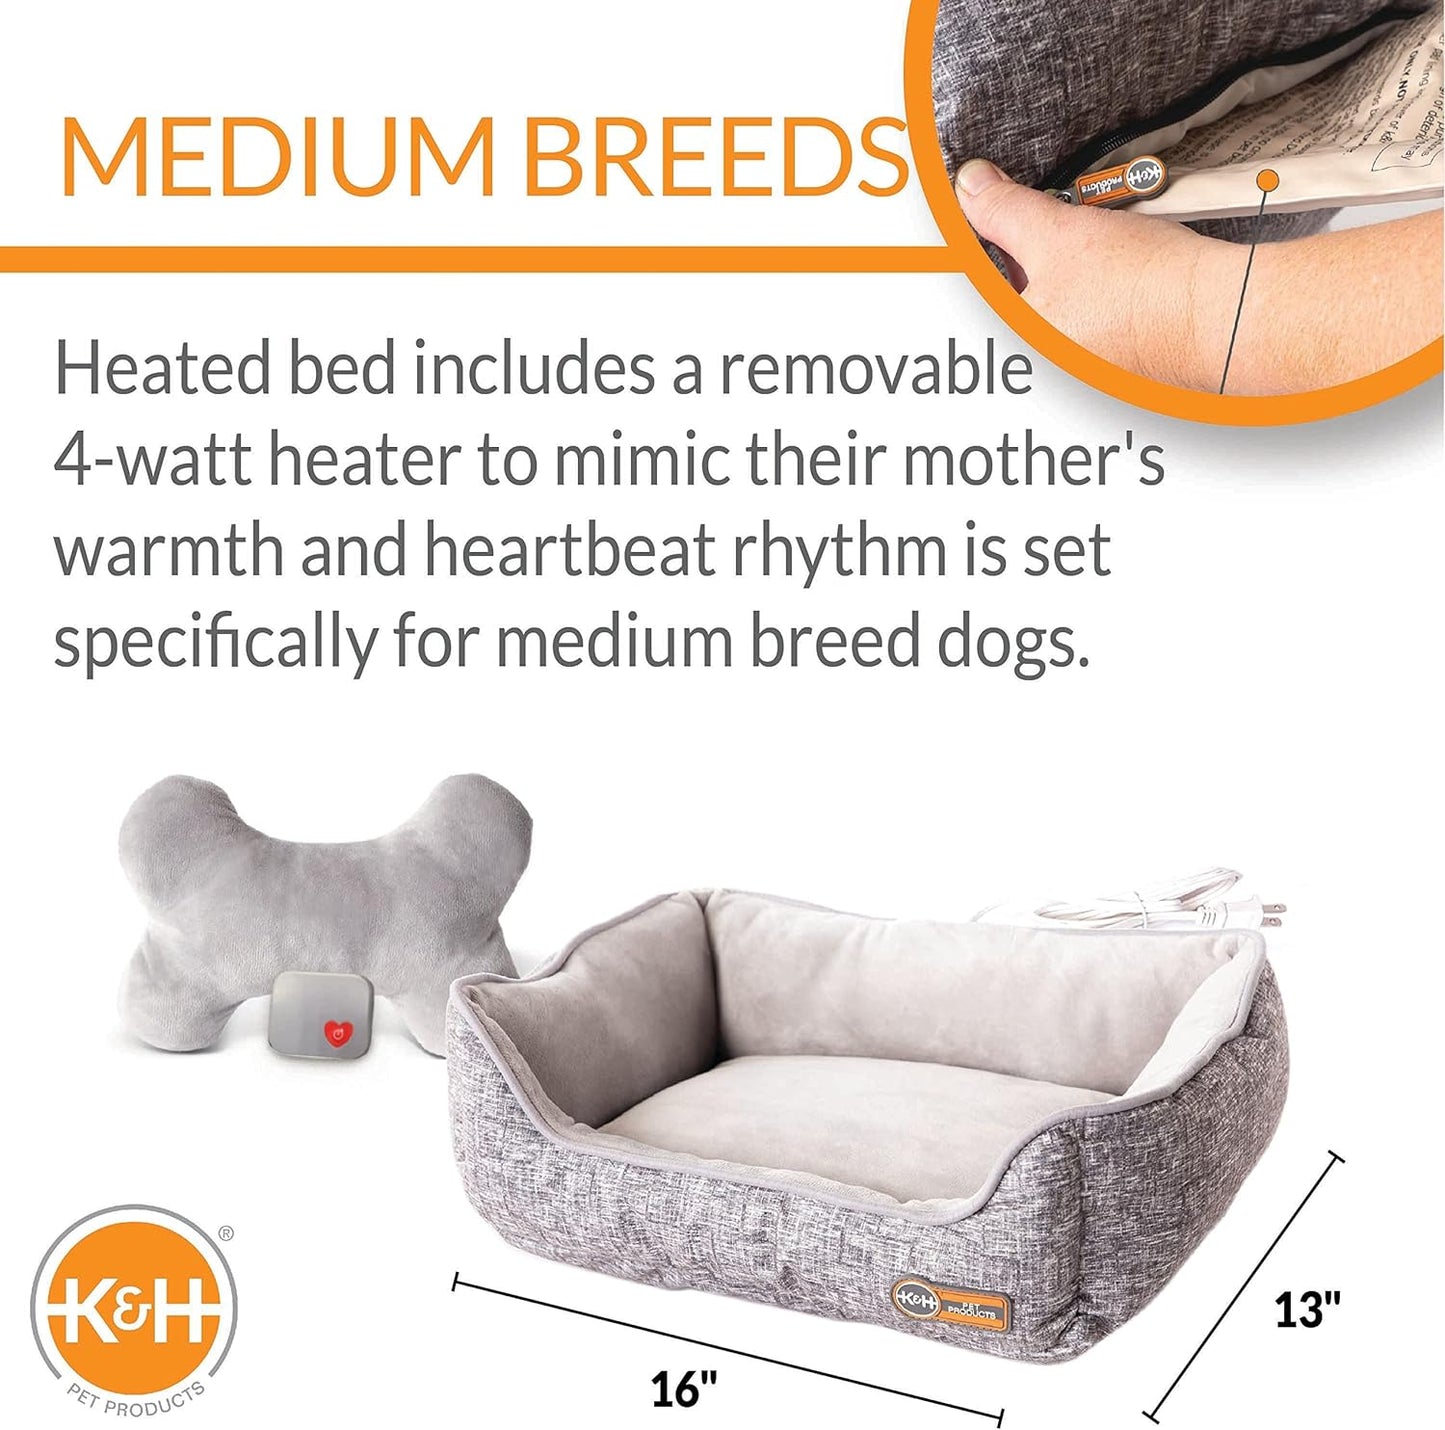 K&H Pet Products Mother's Heartbeat Heated Dog Bed with Bone Pillow Heartbeat Puppy Toy, New Puppy Essential Heated Puppy Bed + Dog Anxiety Toy - Gray 13 X 16 Inches w\/ Medium Breed Heartbeat Rhythm